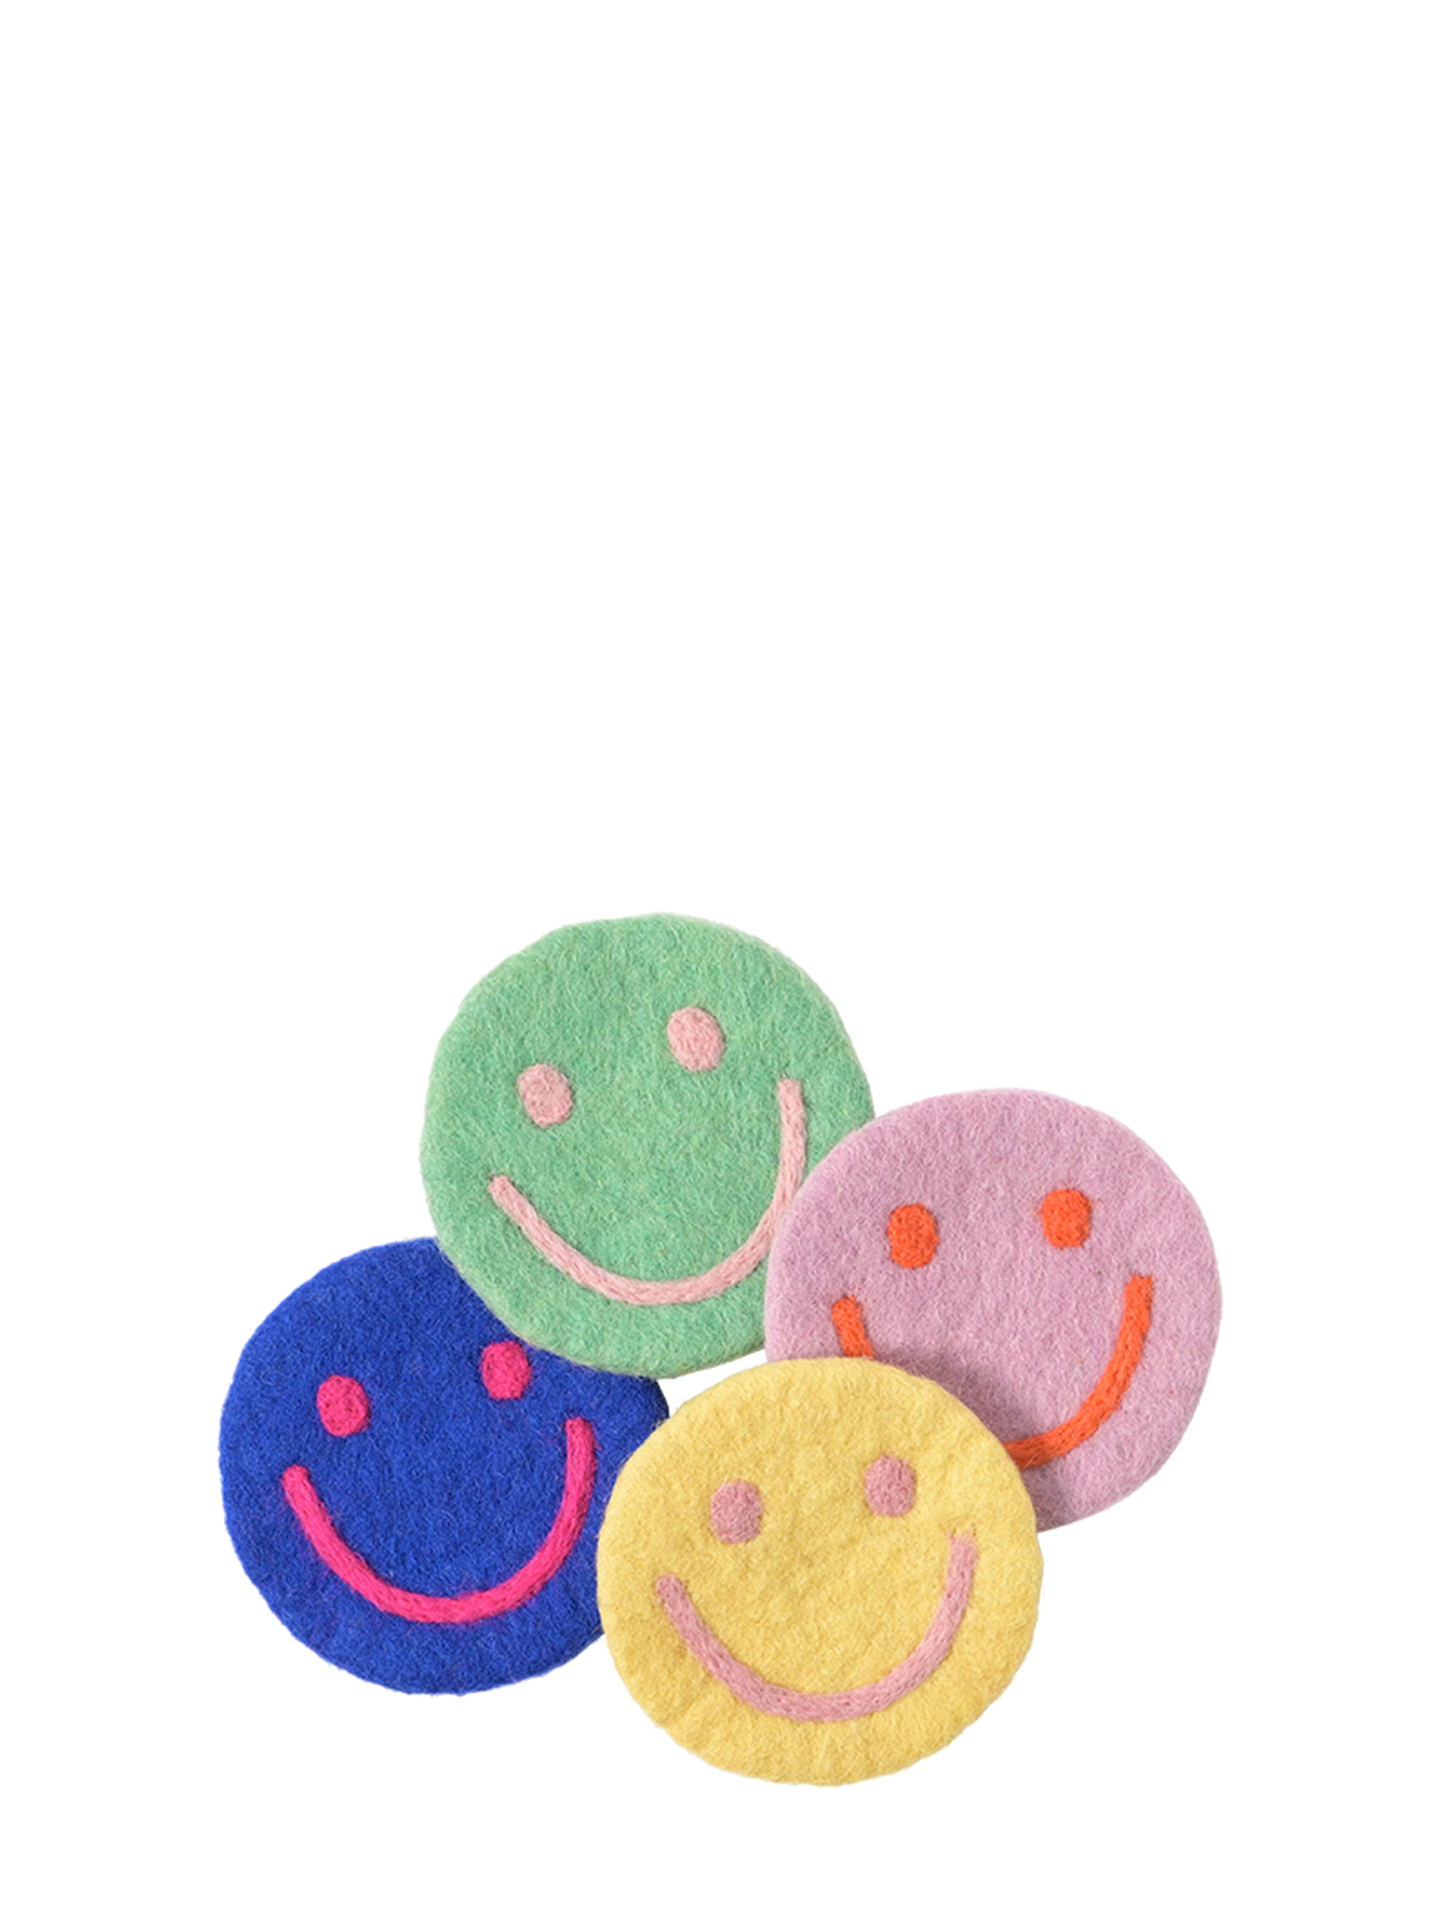 Smiley Wool Coaster, 4 colours